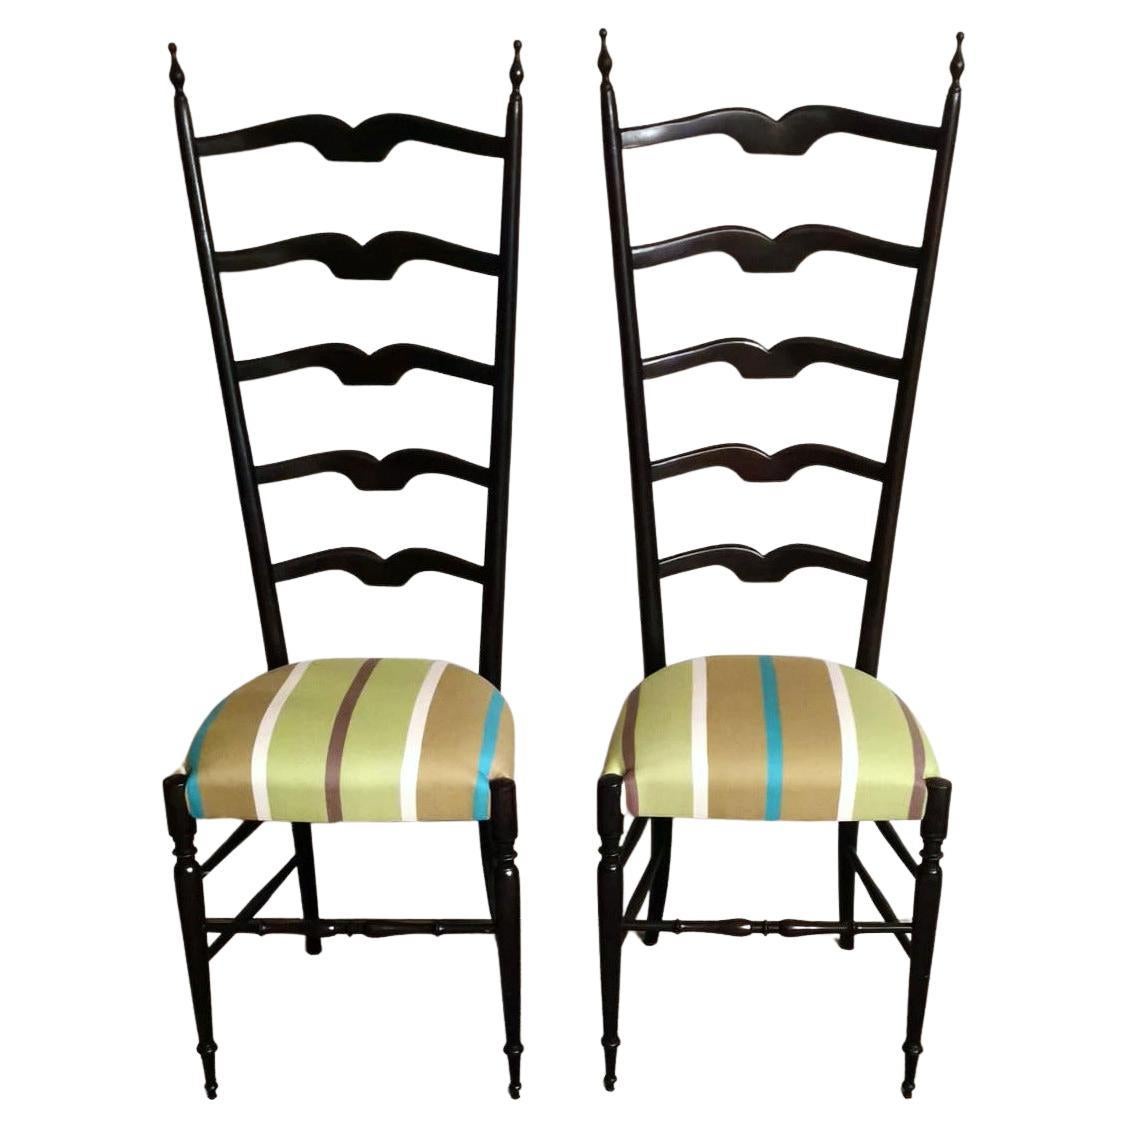 Paolo Buffa Style Pair of Chiavari Chairs in Italian Wood with High Backrest